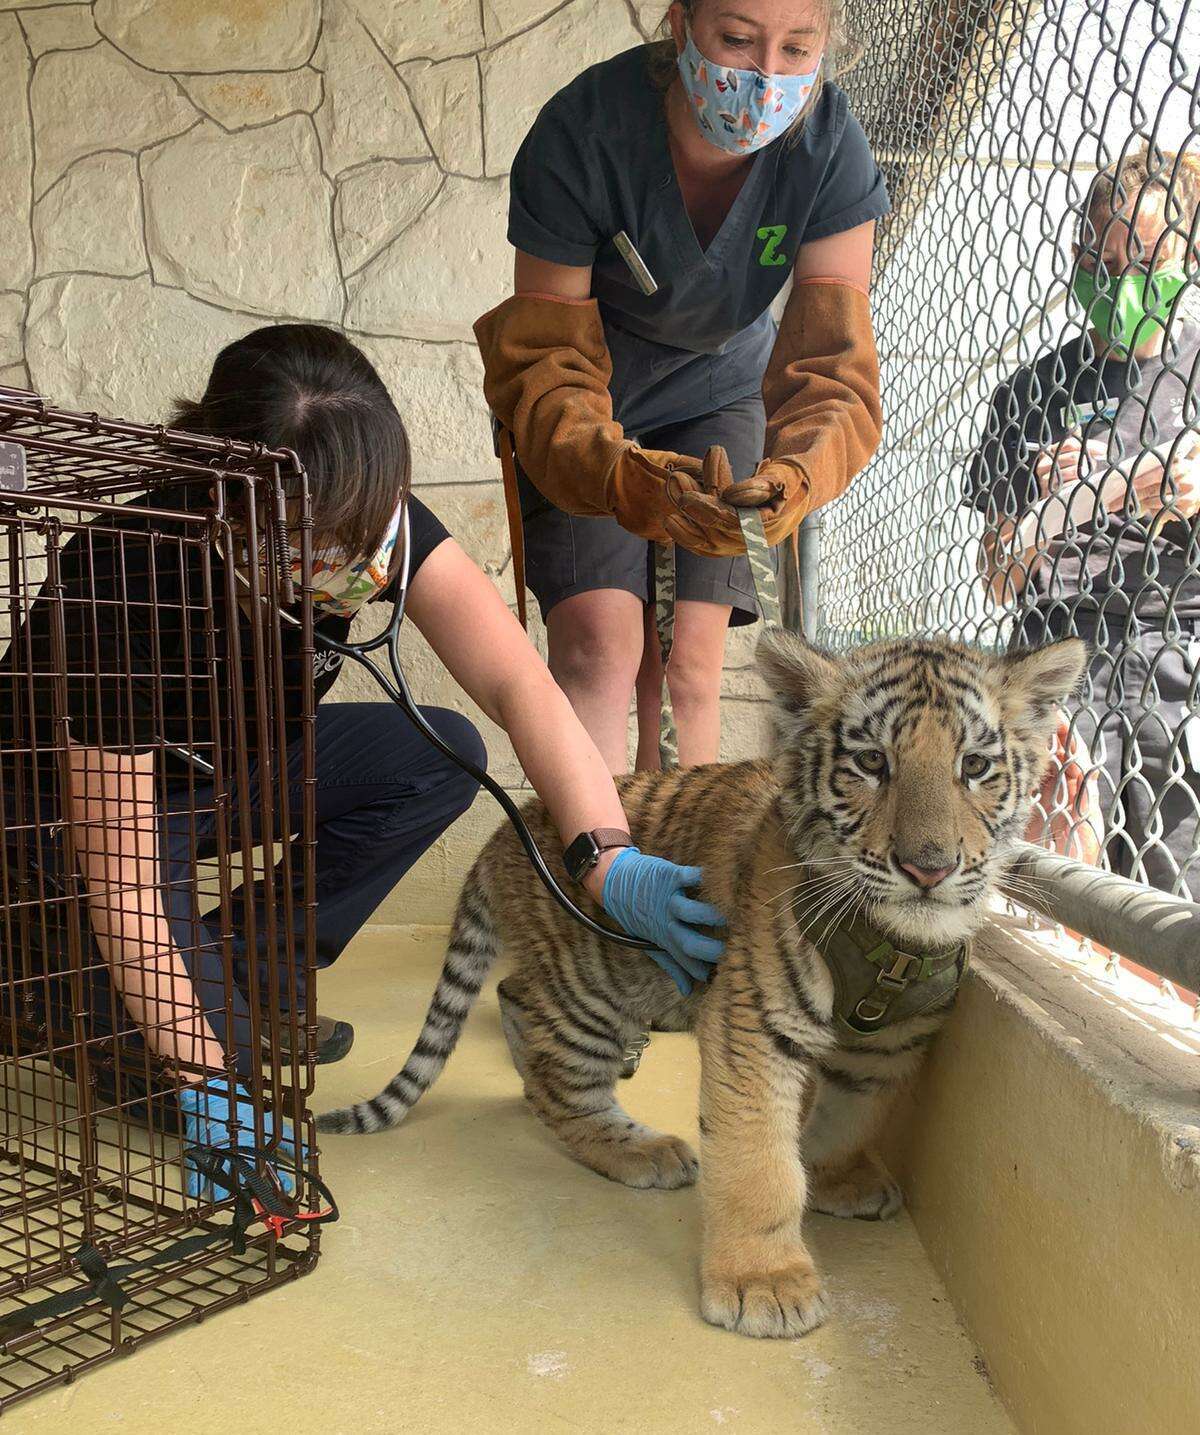 Veterinarians and animal care specialists tended to the two animals after being confiscated in March.